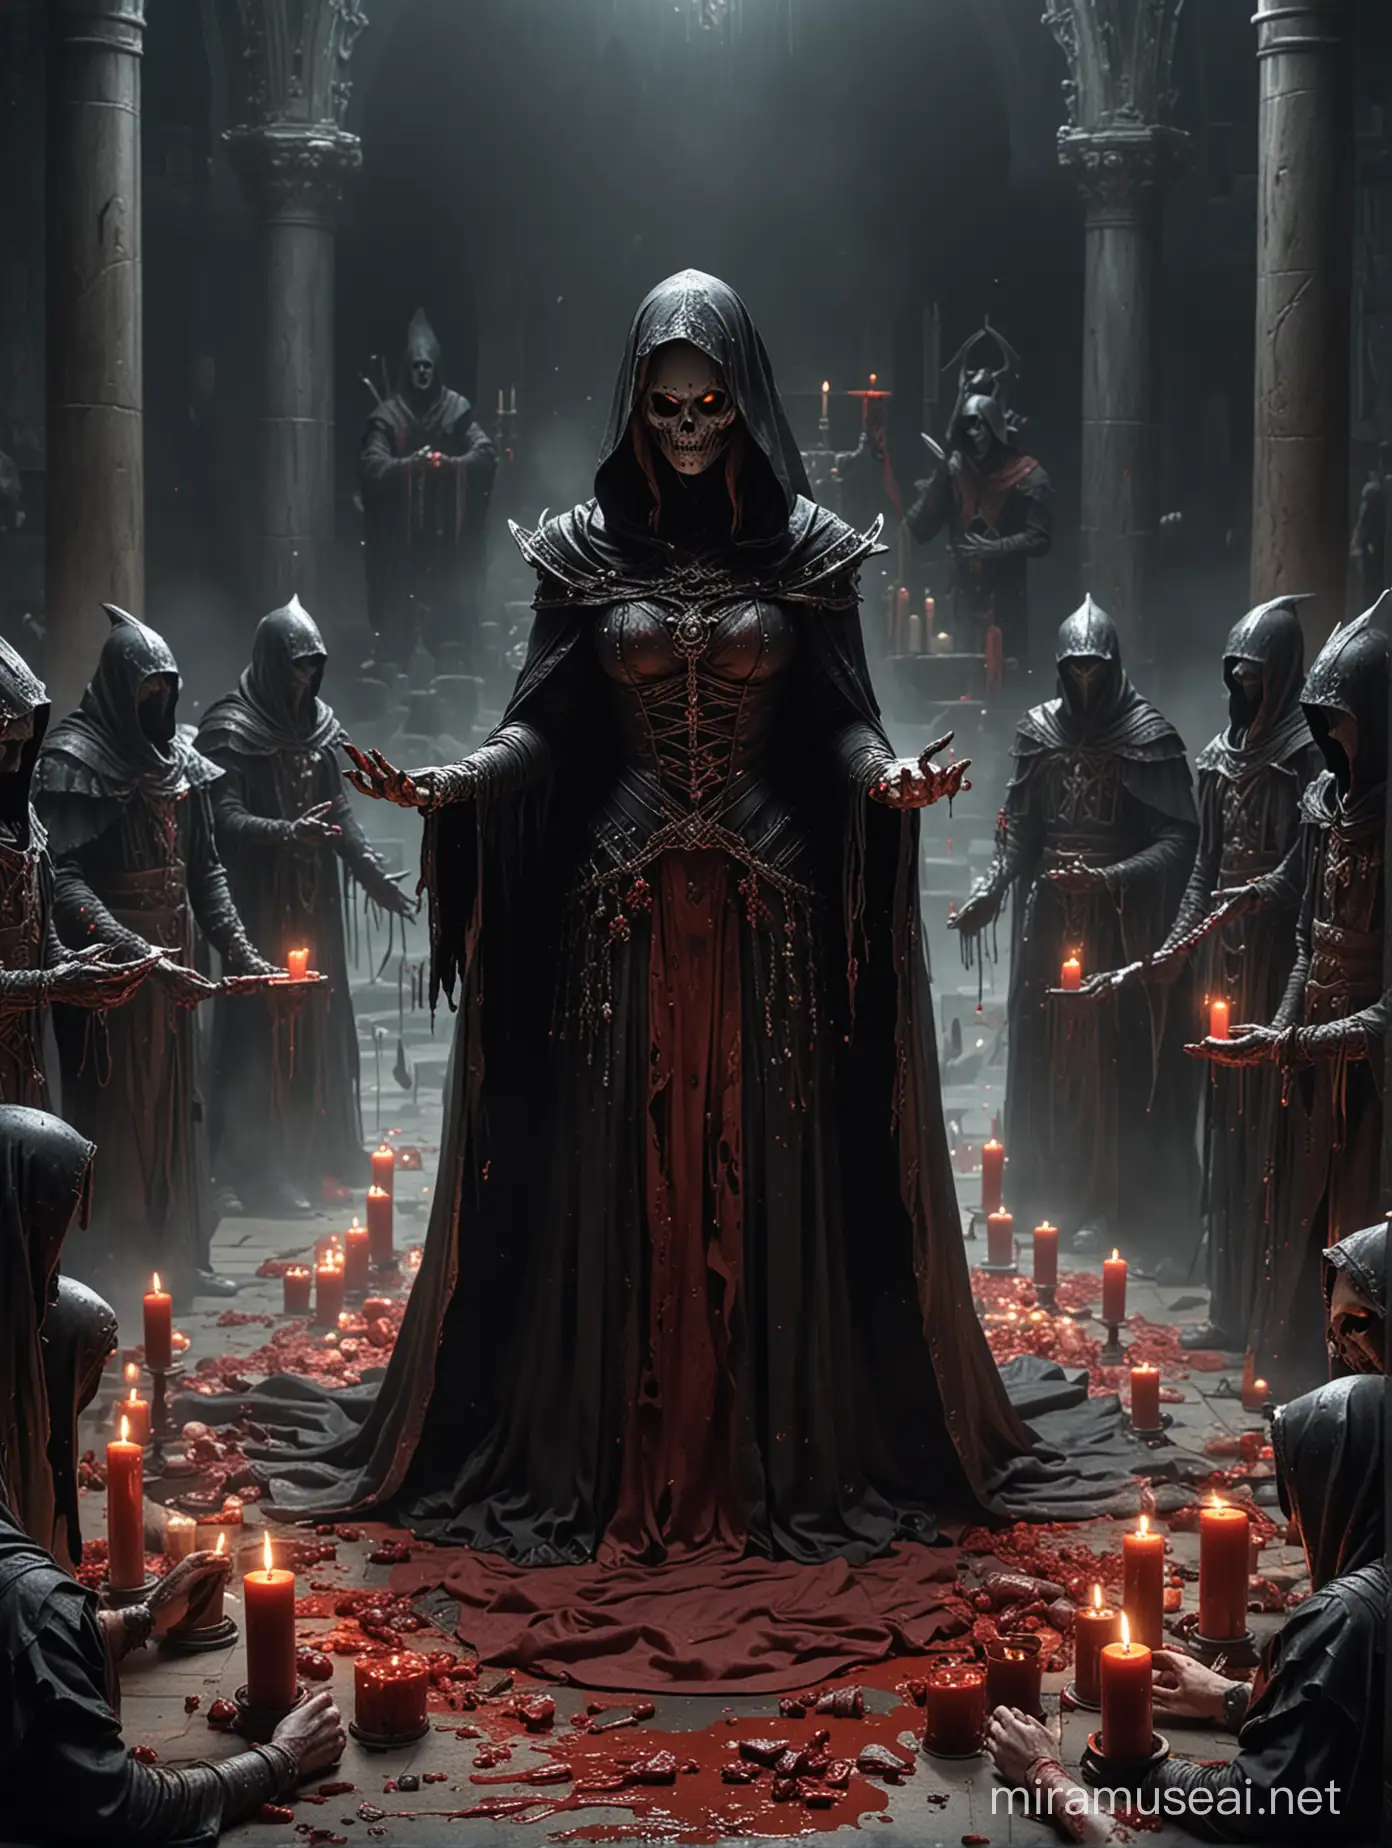 Queen Lich Performing Dark Ritual with Hooded Acolytes